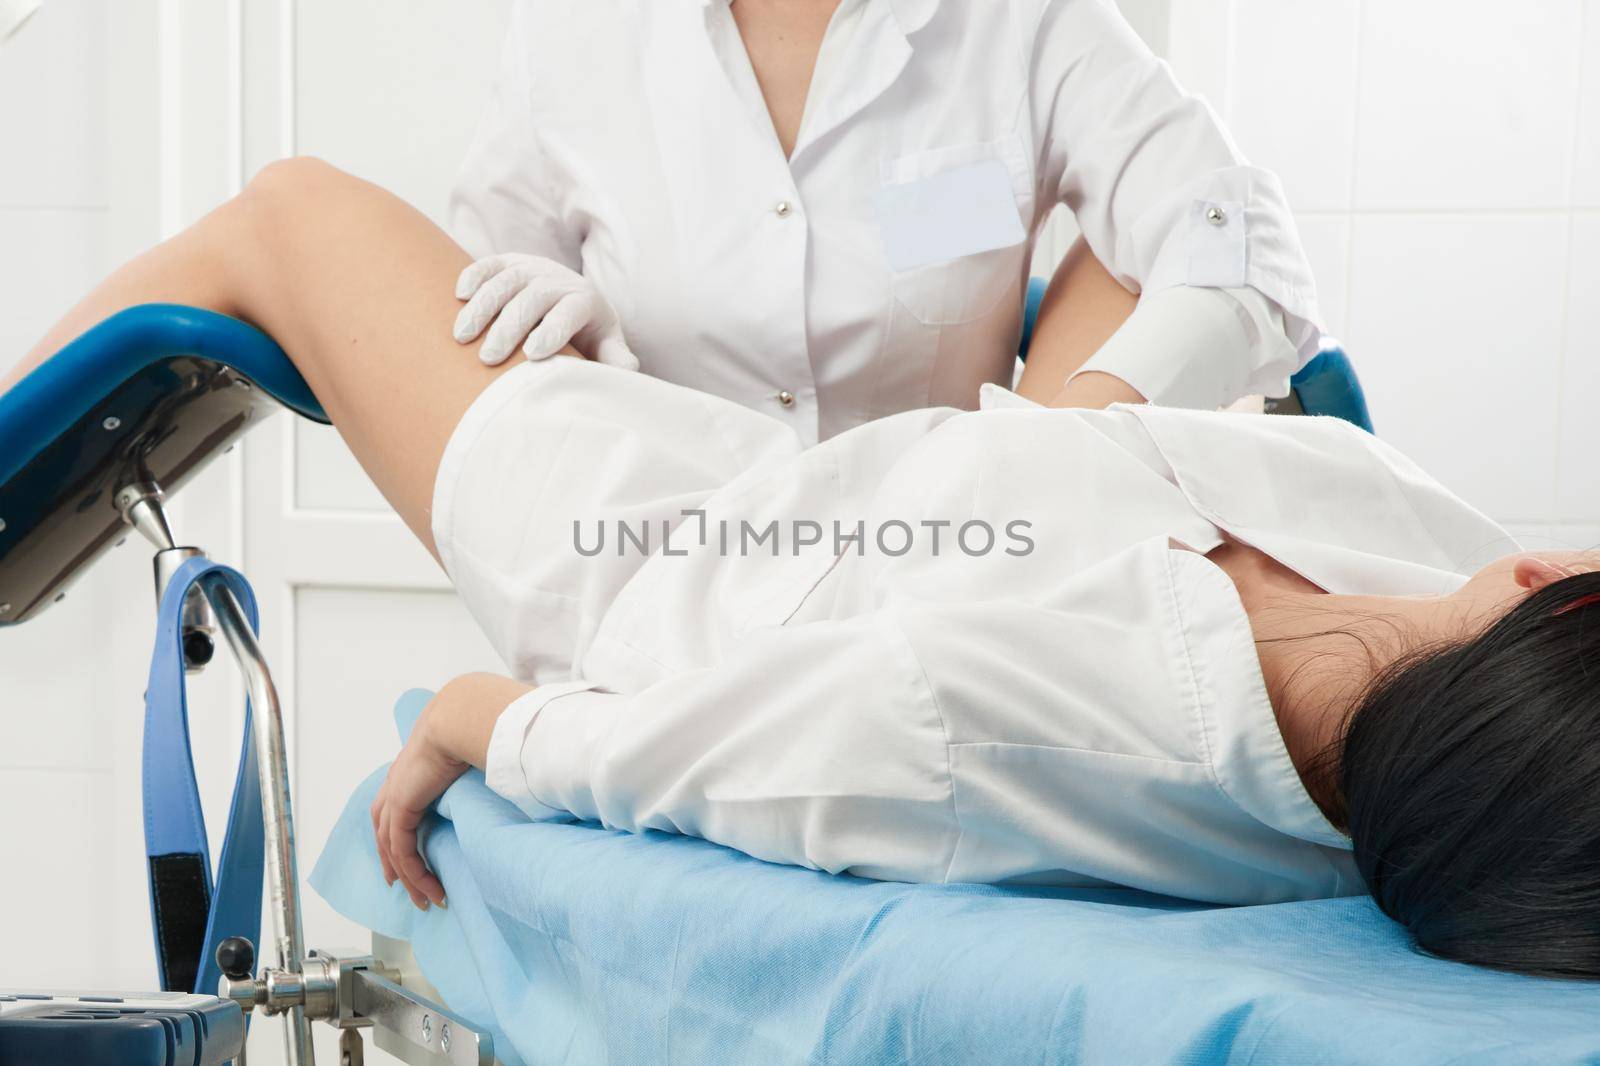 gynecologist is examine a patient who is sitting in a gynecological chair